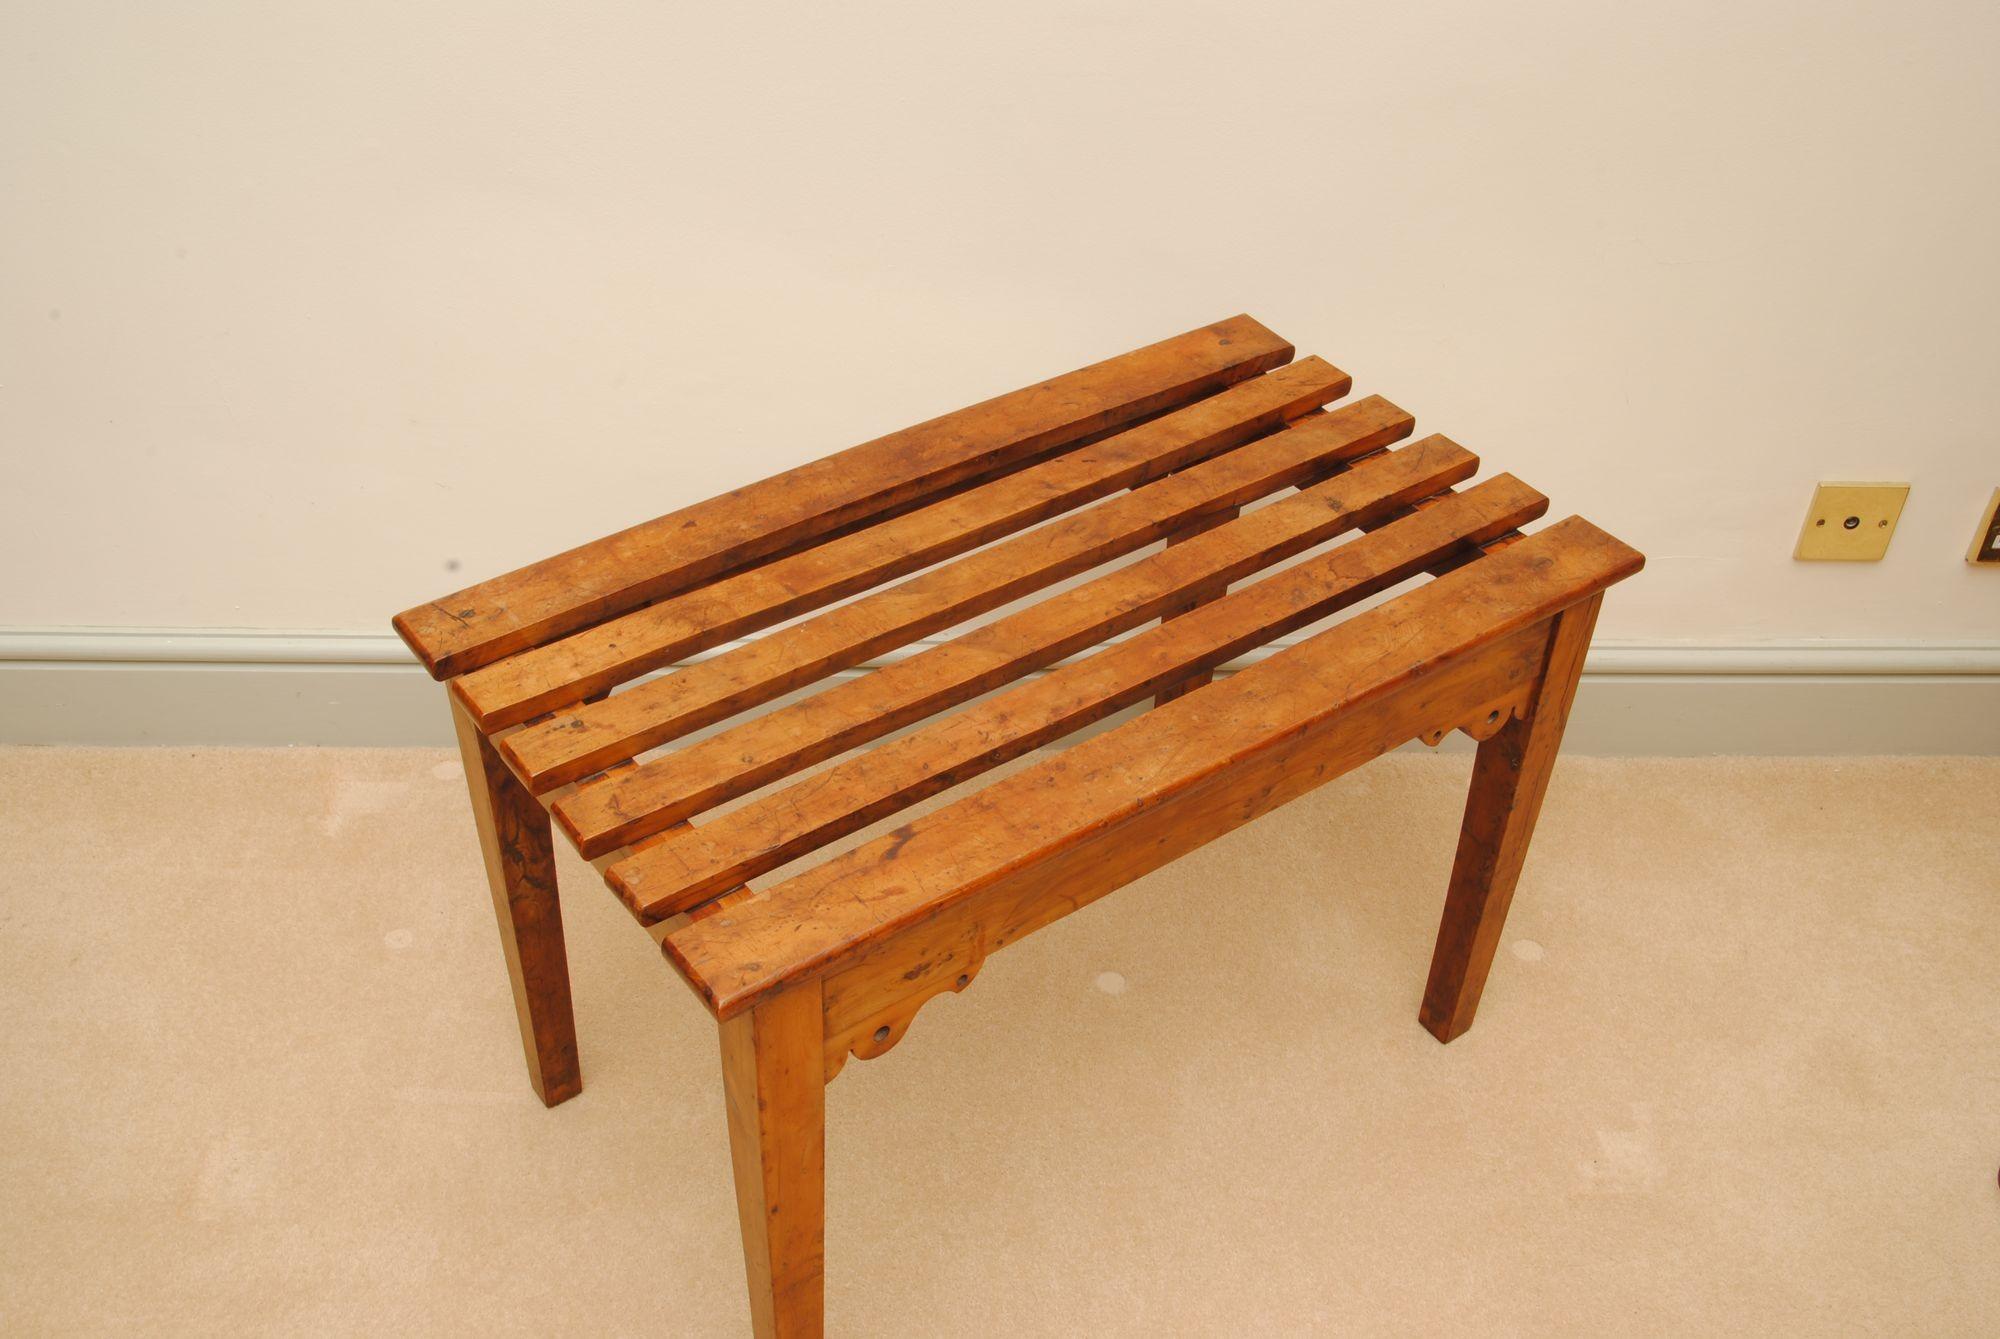 Unusual 19th Century Yew Wood Luggage Rack In Good Condition For Sale In Lincolnshire, GB